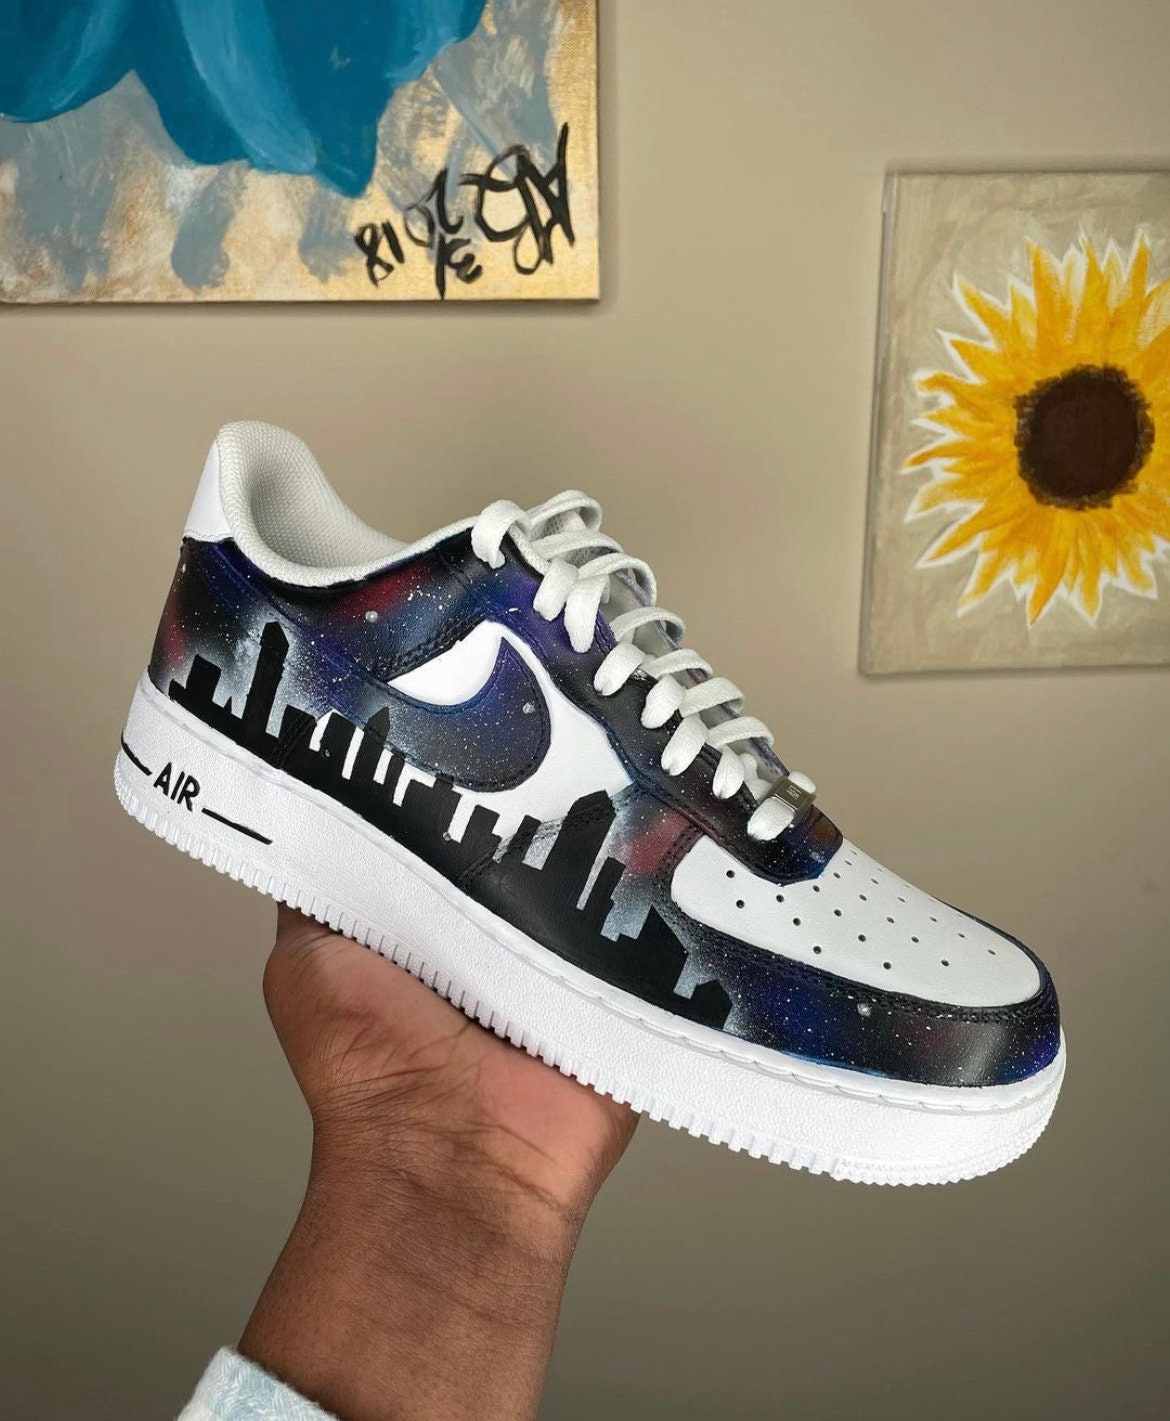 Galaxy air force 1s | Etsy